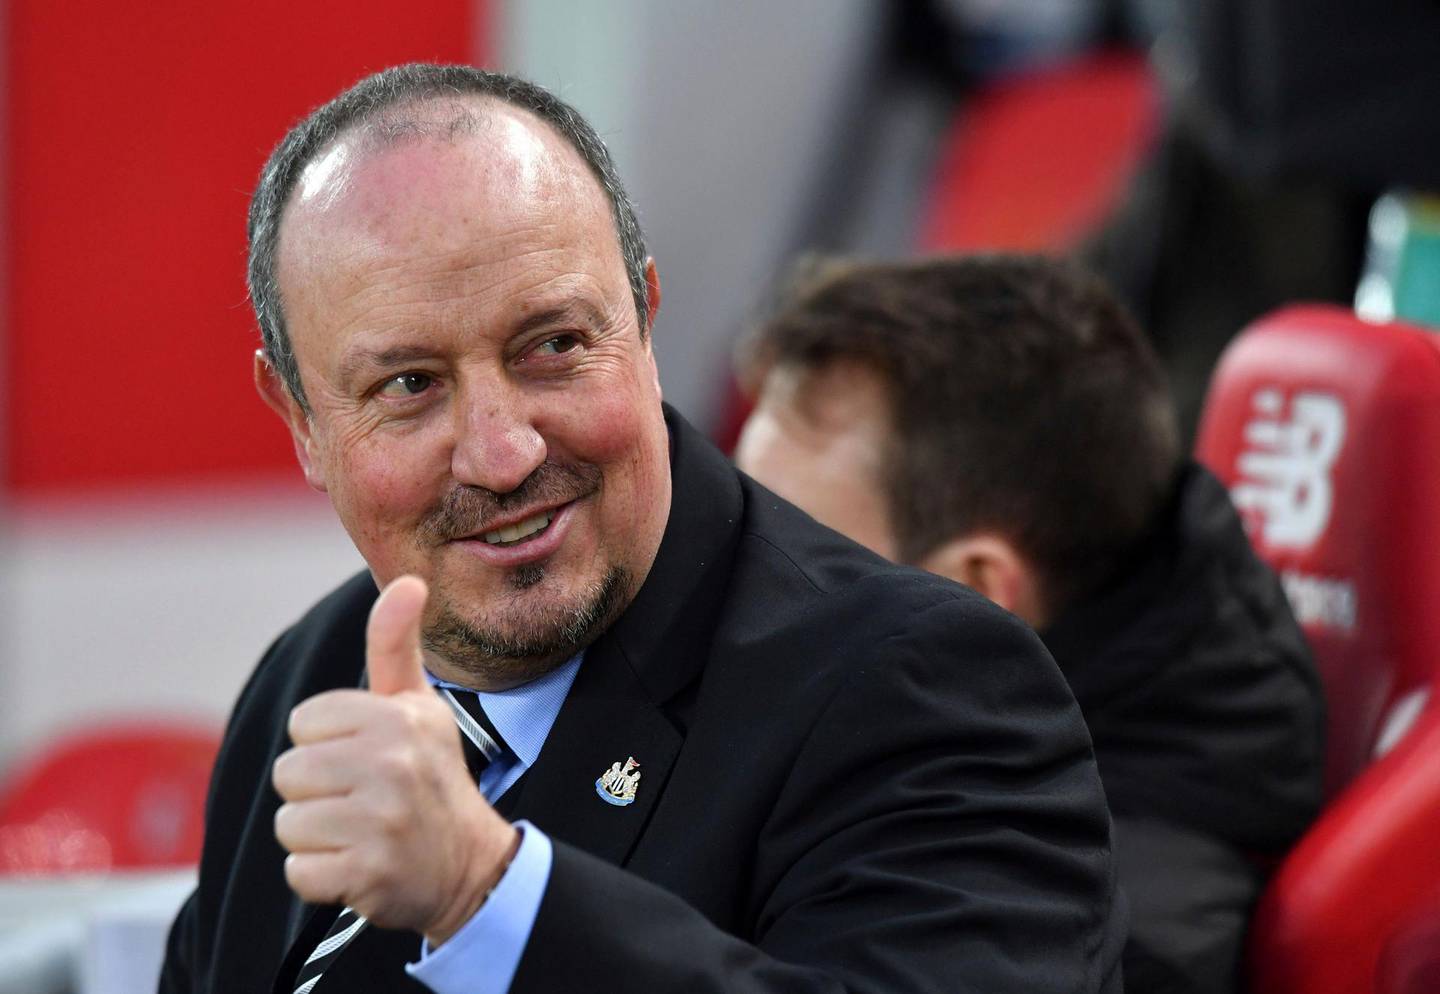 Newcastle United manager Rafael Benitez gestures prior to the English Premier League soccer match between Liverpool and Newcastle United,  at Anfield, in Liverpool, England, Saturday March 3, 2018. (Anthony Devlin/PA via AP)